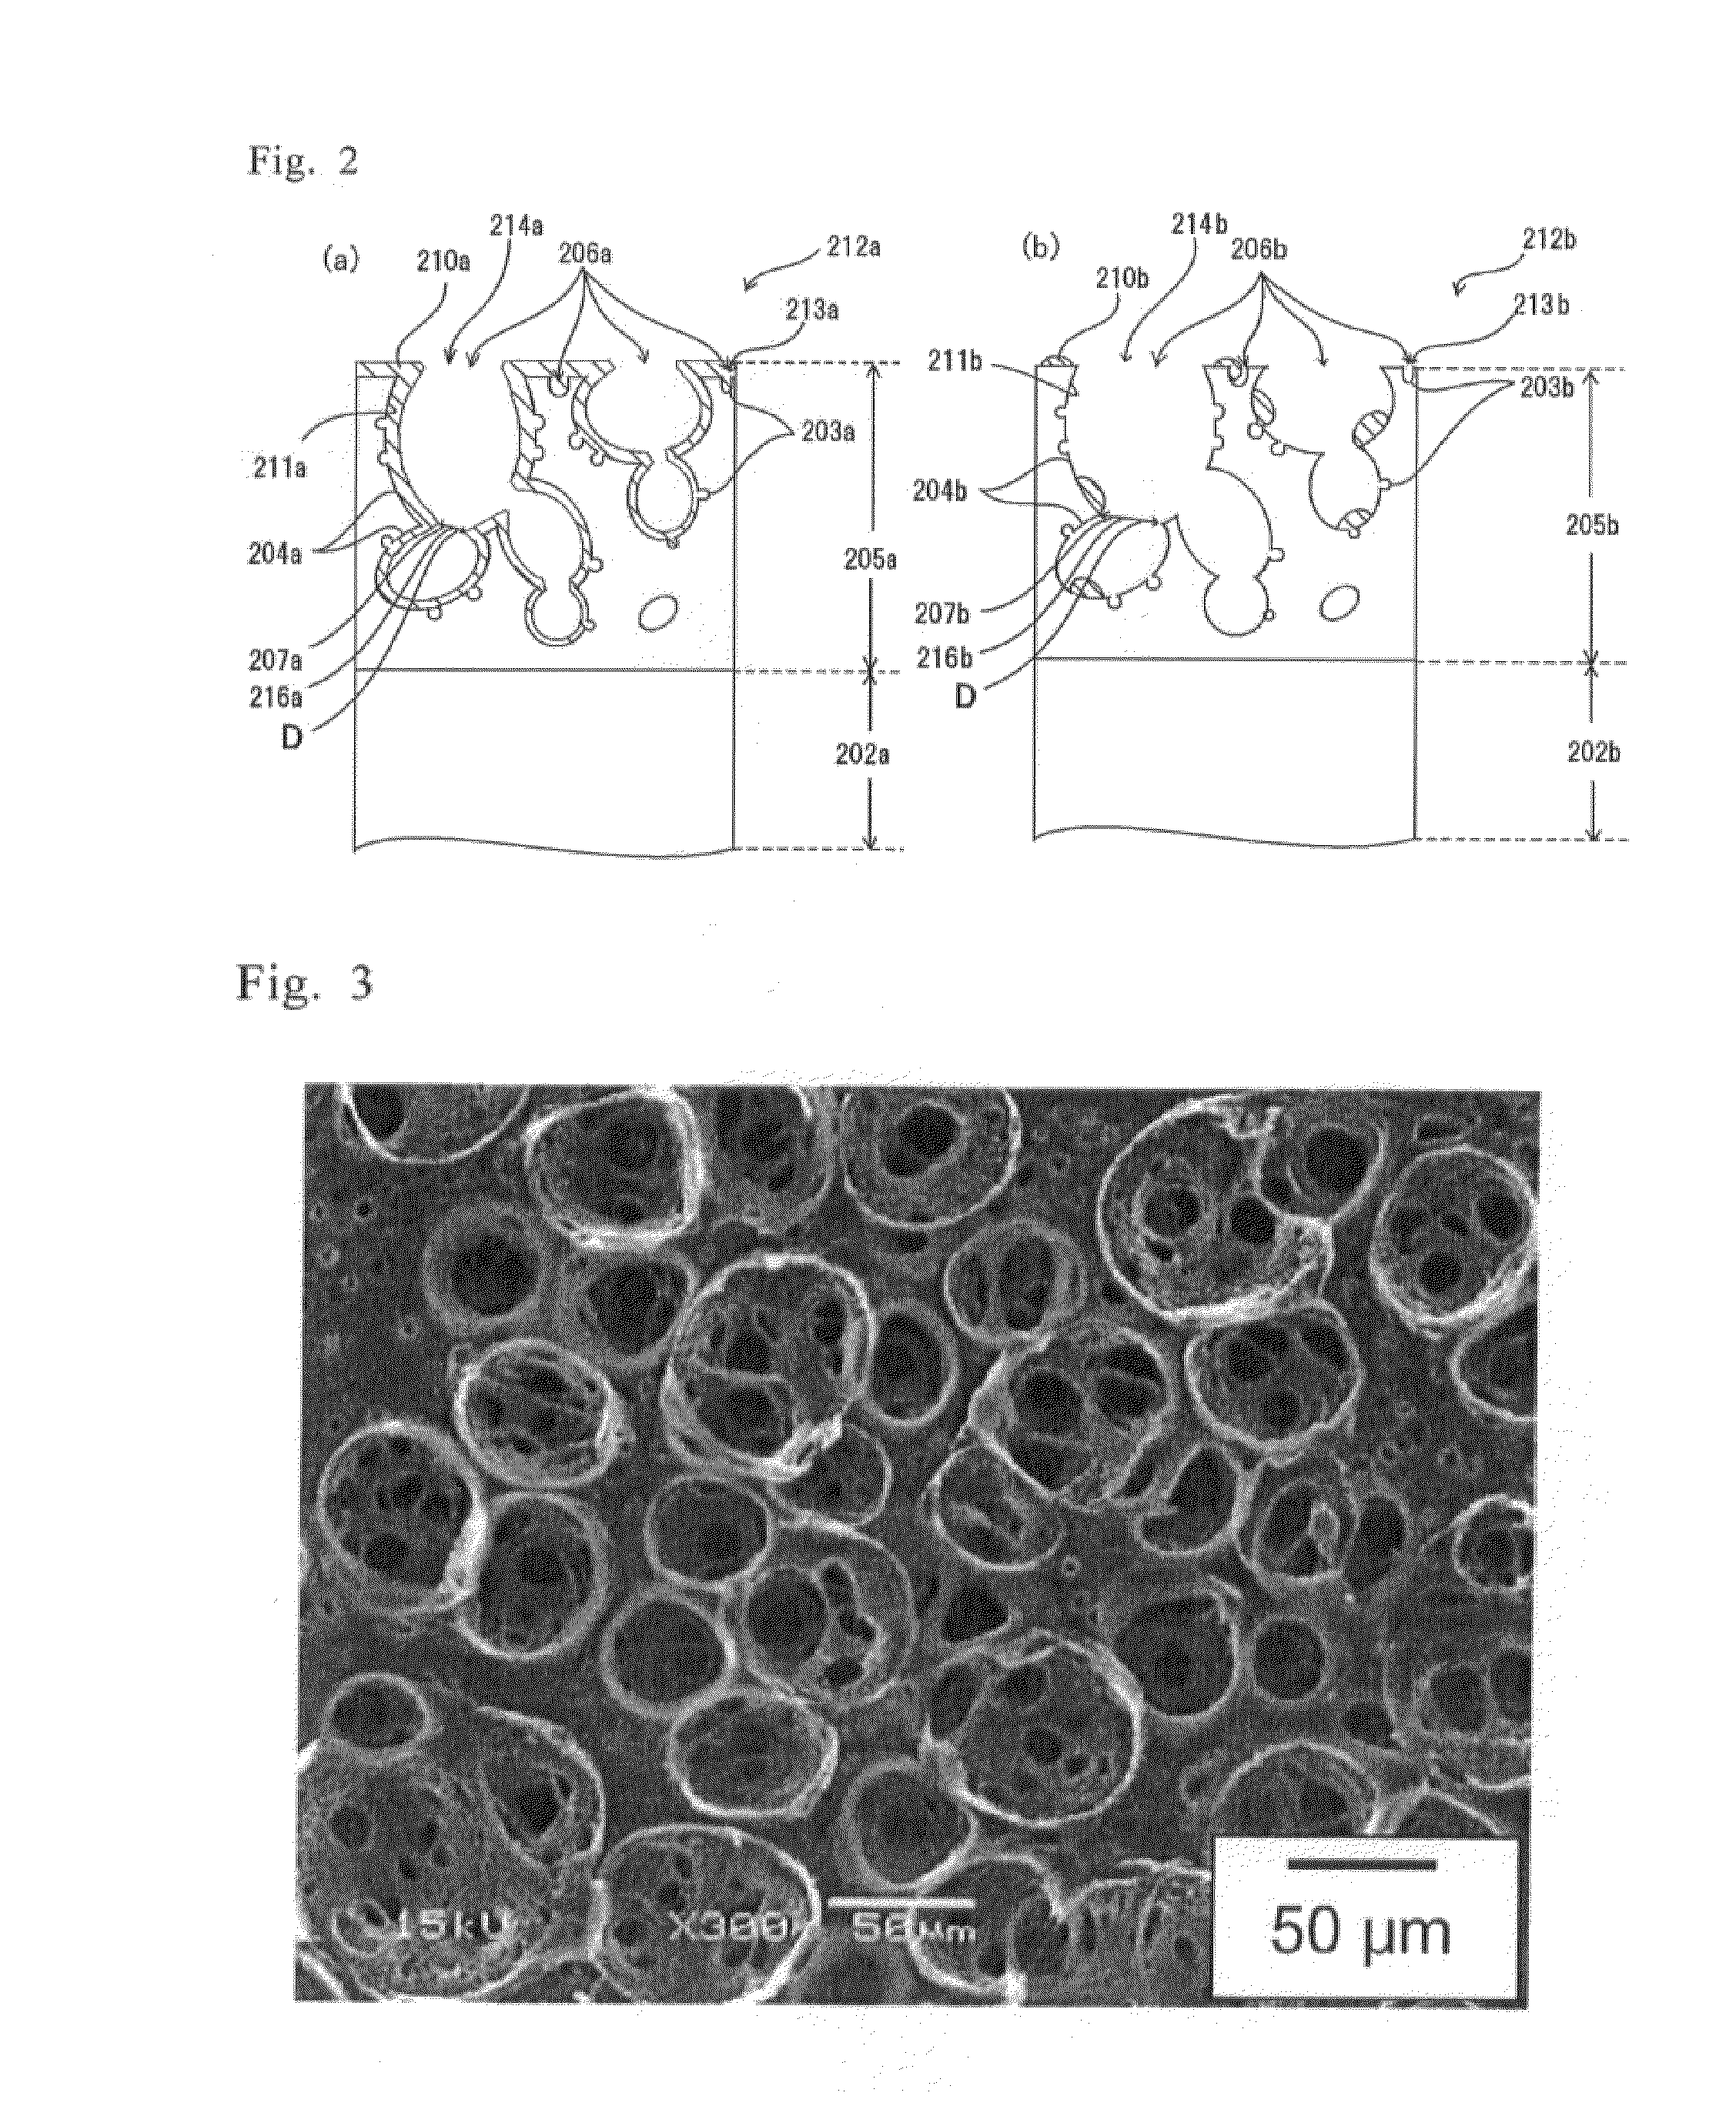 Article with foamed surface, implant and method of producing the same